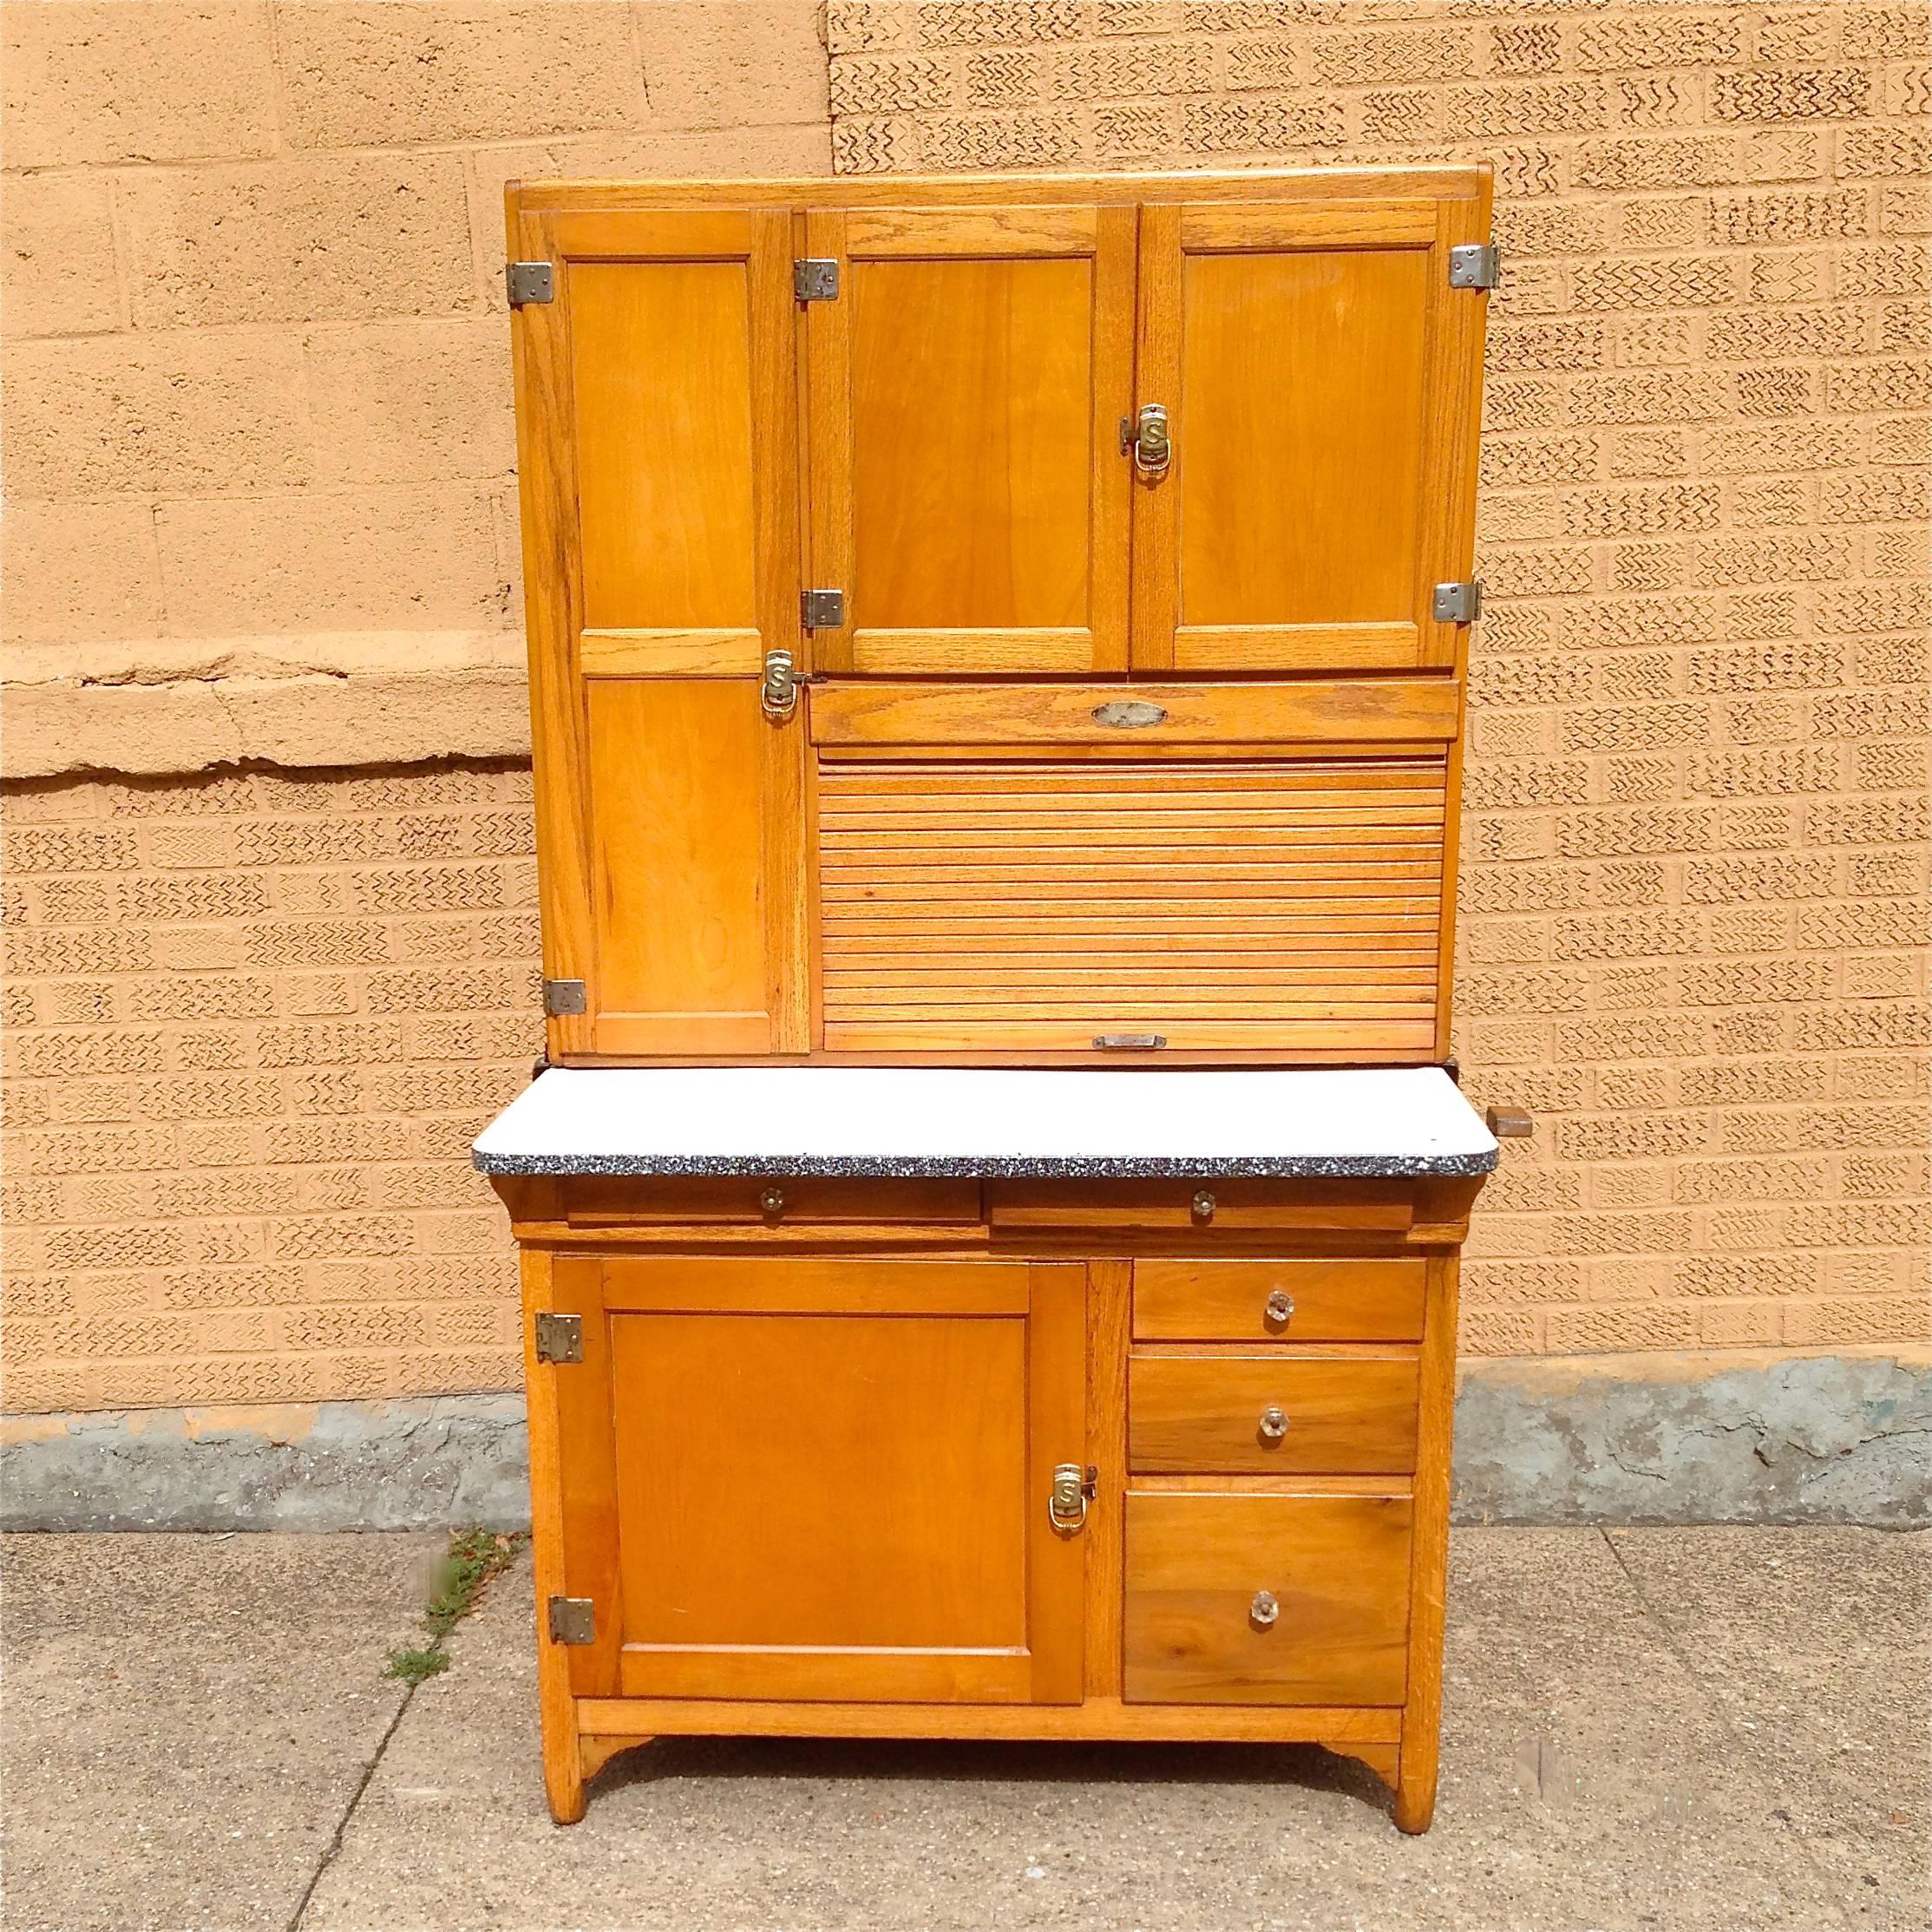 Classic, early 20th century, maple, kitchen hoosier with enamel prep surface, has tons of storage drawers with original glass knobs and roll up, tambour compartment.

Measures: 36" W x 10" top /24" bottom d x 68" ht, prep surface